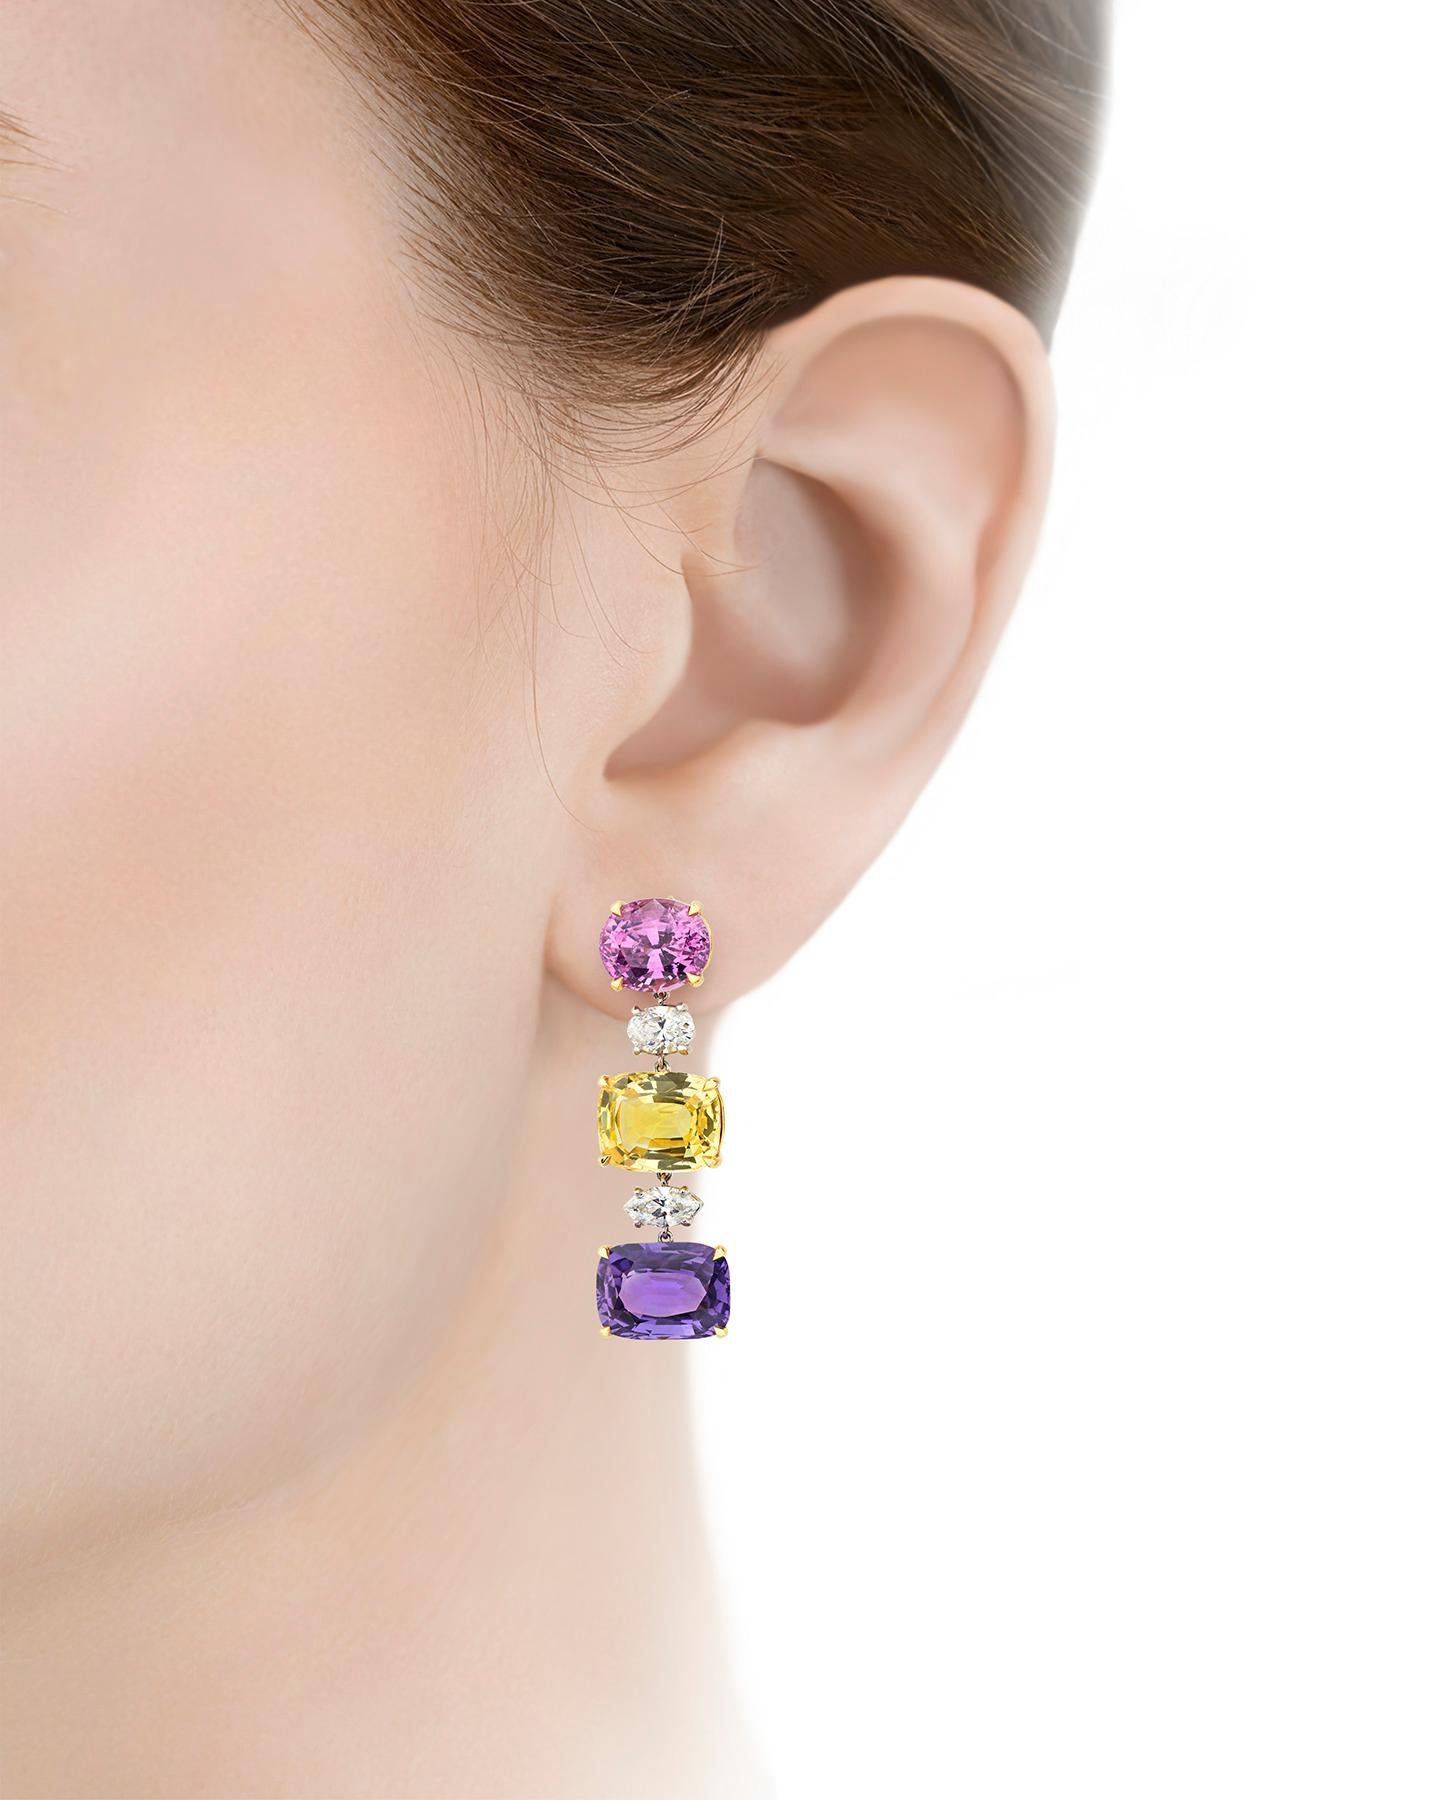 Six stunning sapphires present a sparkling rainbow of hues in these eye-catching earrings by legendary Italian jeweler Bulgari. The dazzling pair showcases 30.24 total carats of sapphires that exhibit a delightful array of hues, from traditional